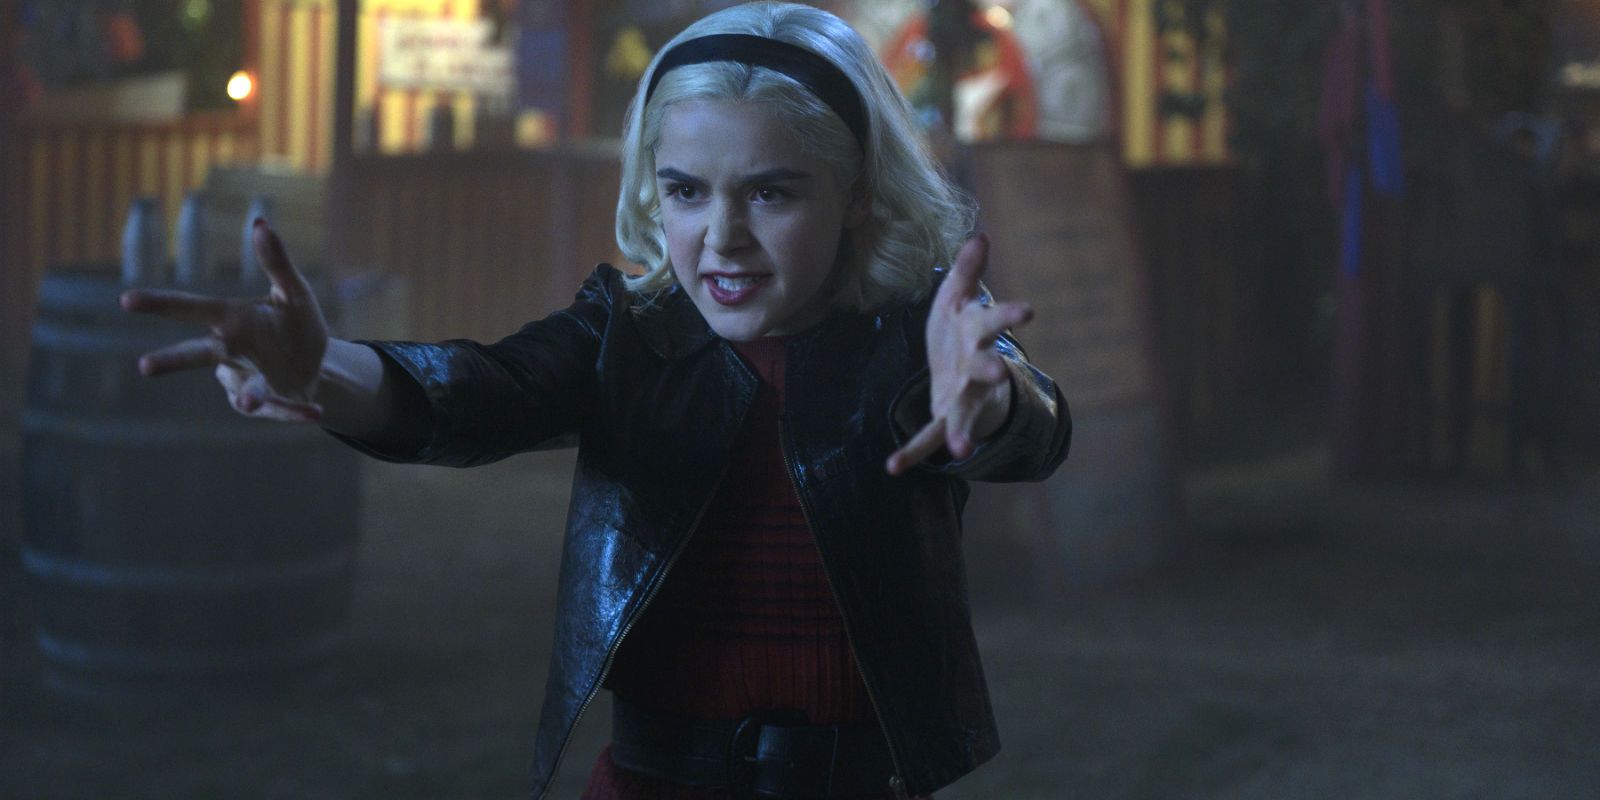 Chilling Adventures of Sabrina Season 4: Release Date & Story Details